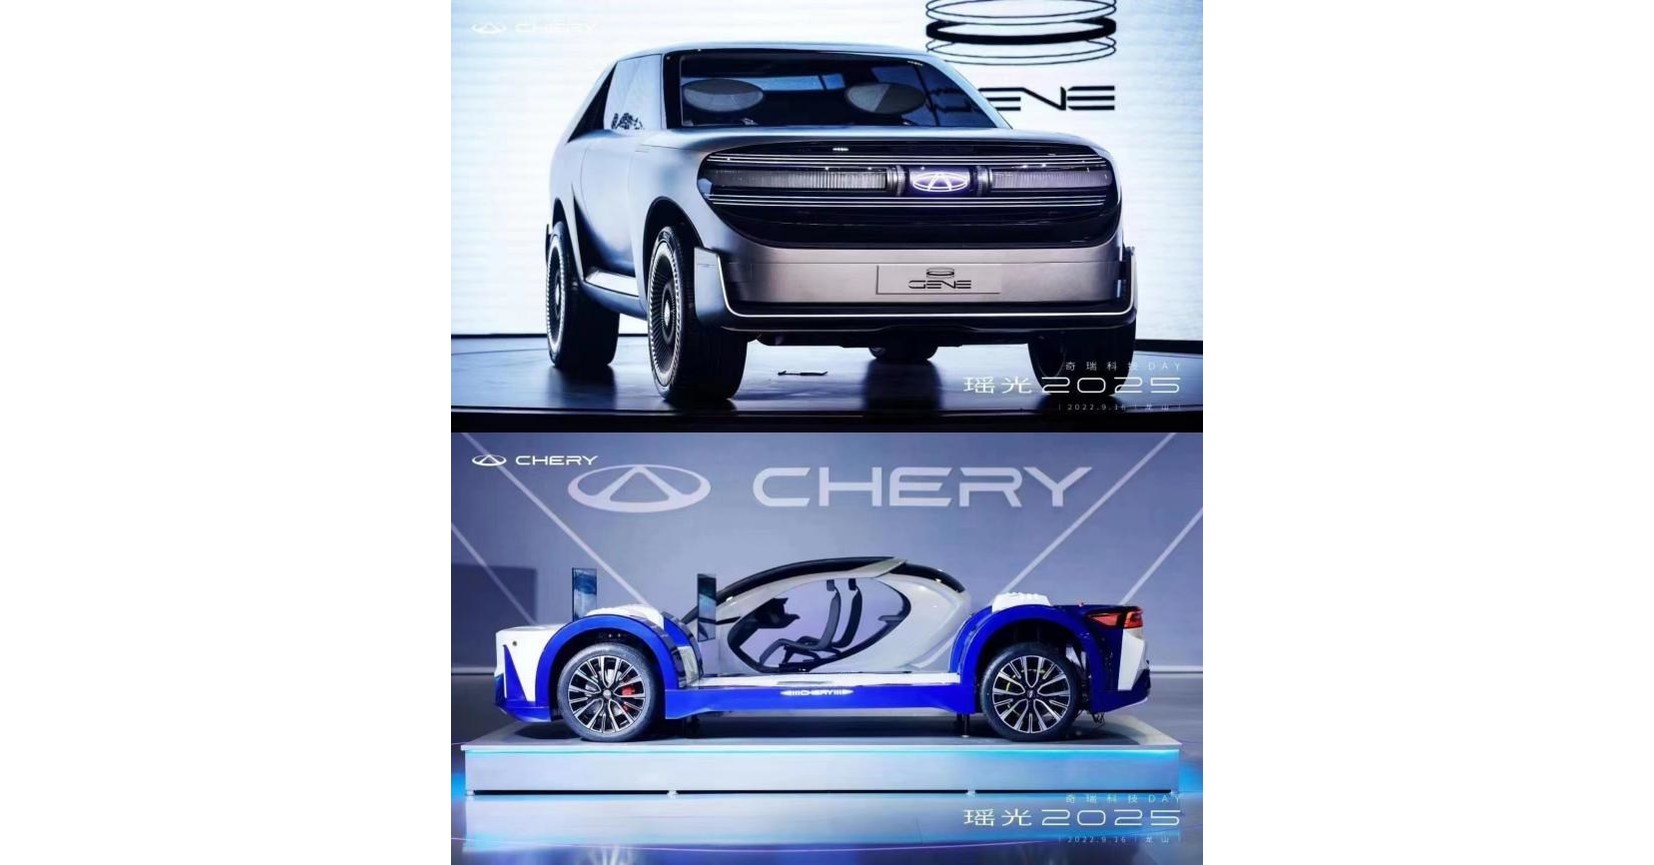 Automobile giant Tech Chery launched the “Yaoguang 2025” future technology strategy